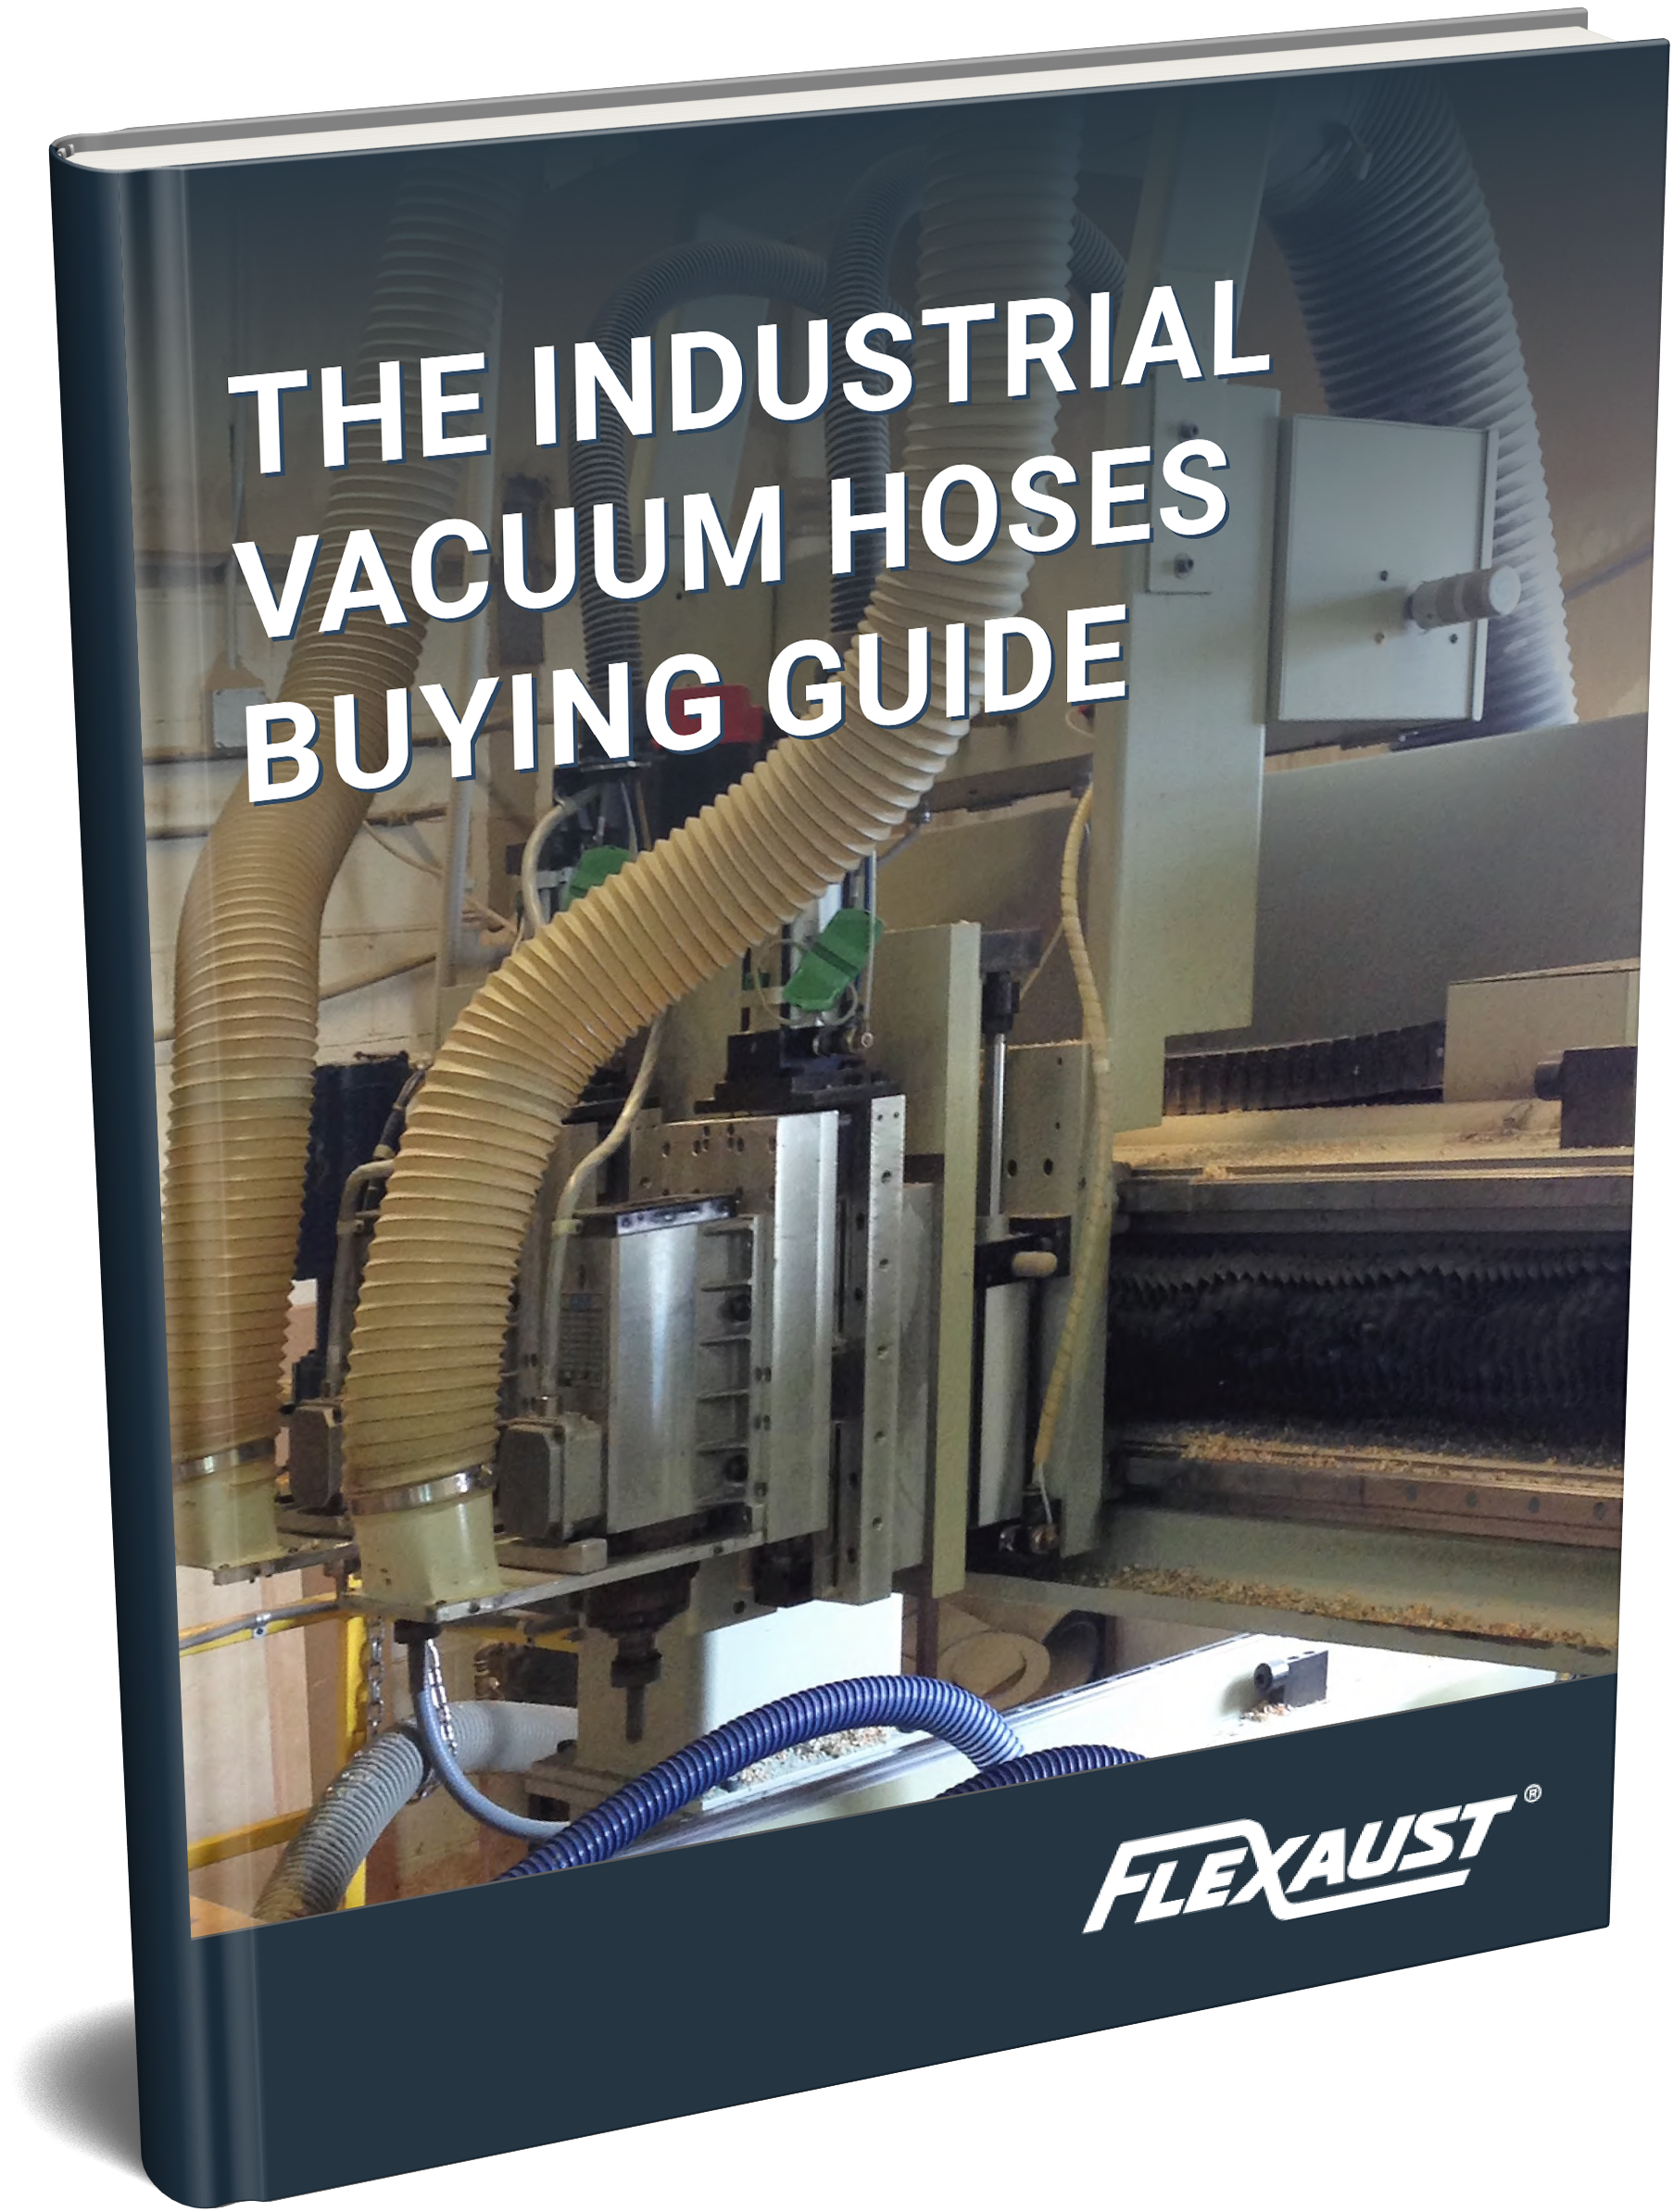 The Industrial Vacuum Hoses Buying Guide